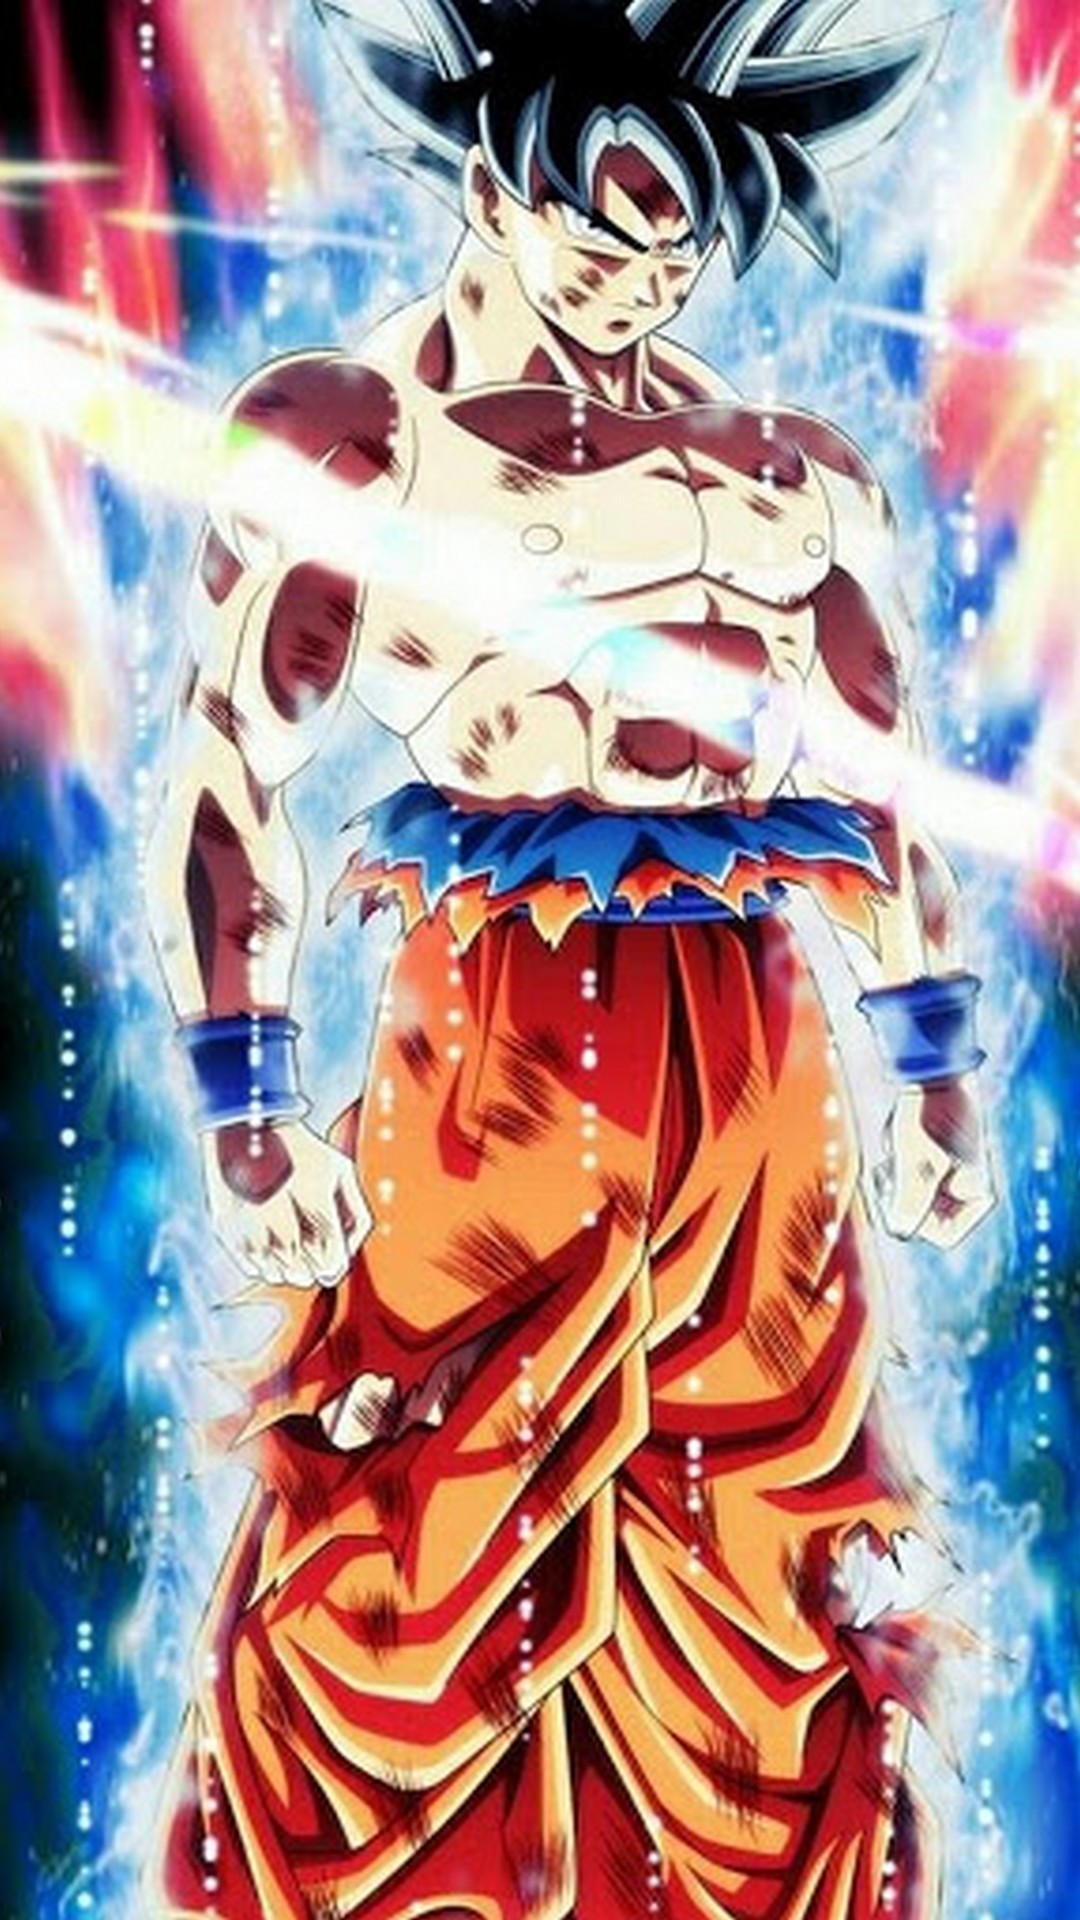 Wallpapers Goku Imagenes with image resolution 1080x1920 pixel. You can make this wallpaper for your iPhone 5, 6, 7, 8, X backgrounds, Mobile Screensaver, or iPad Lock Screen